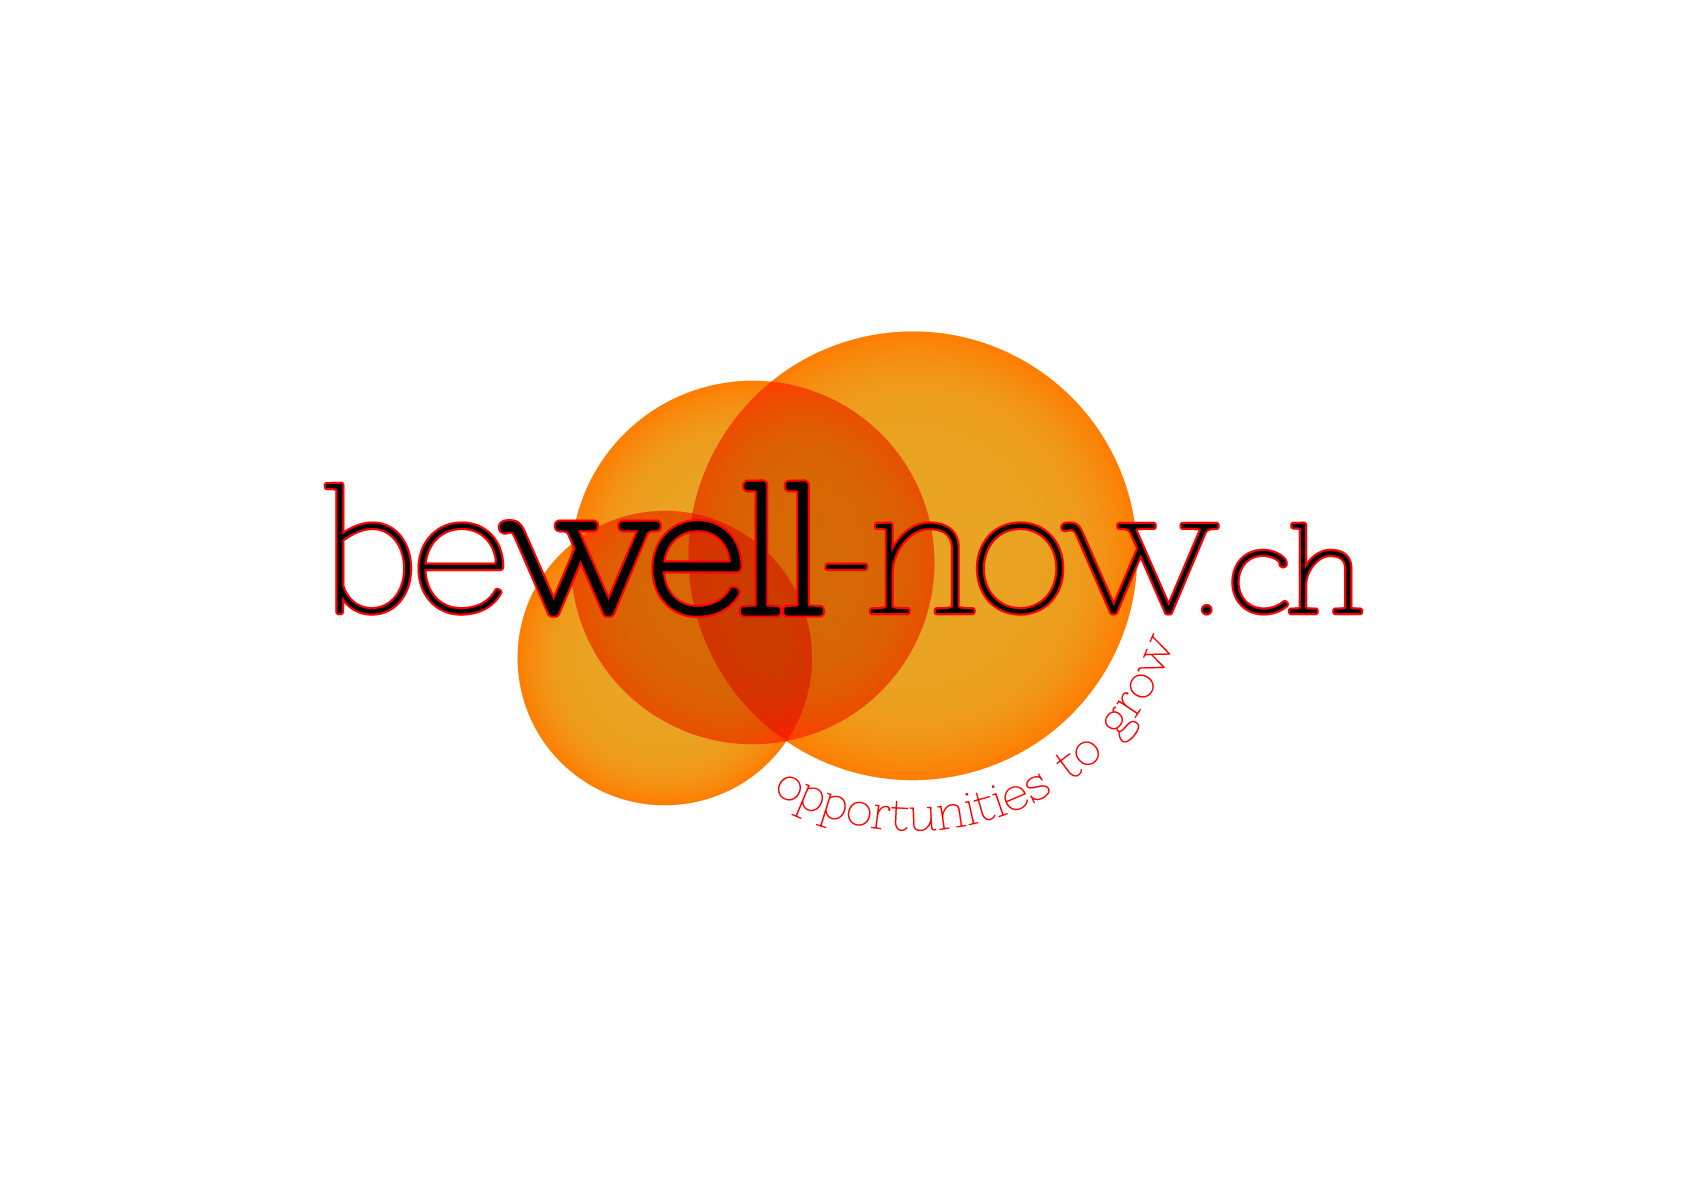 Bewell-now